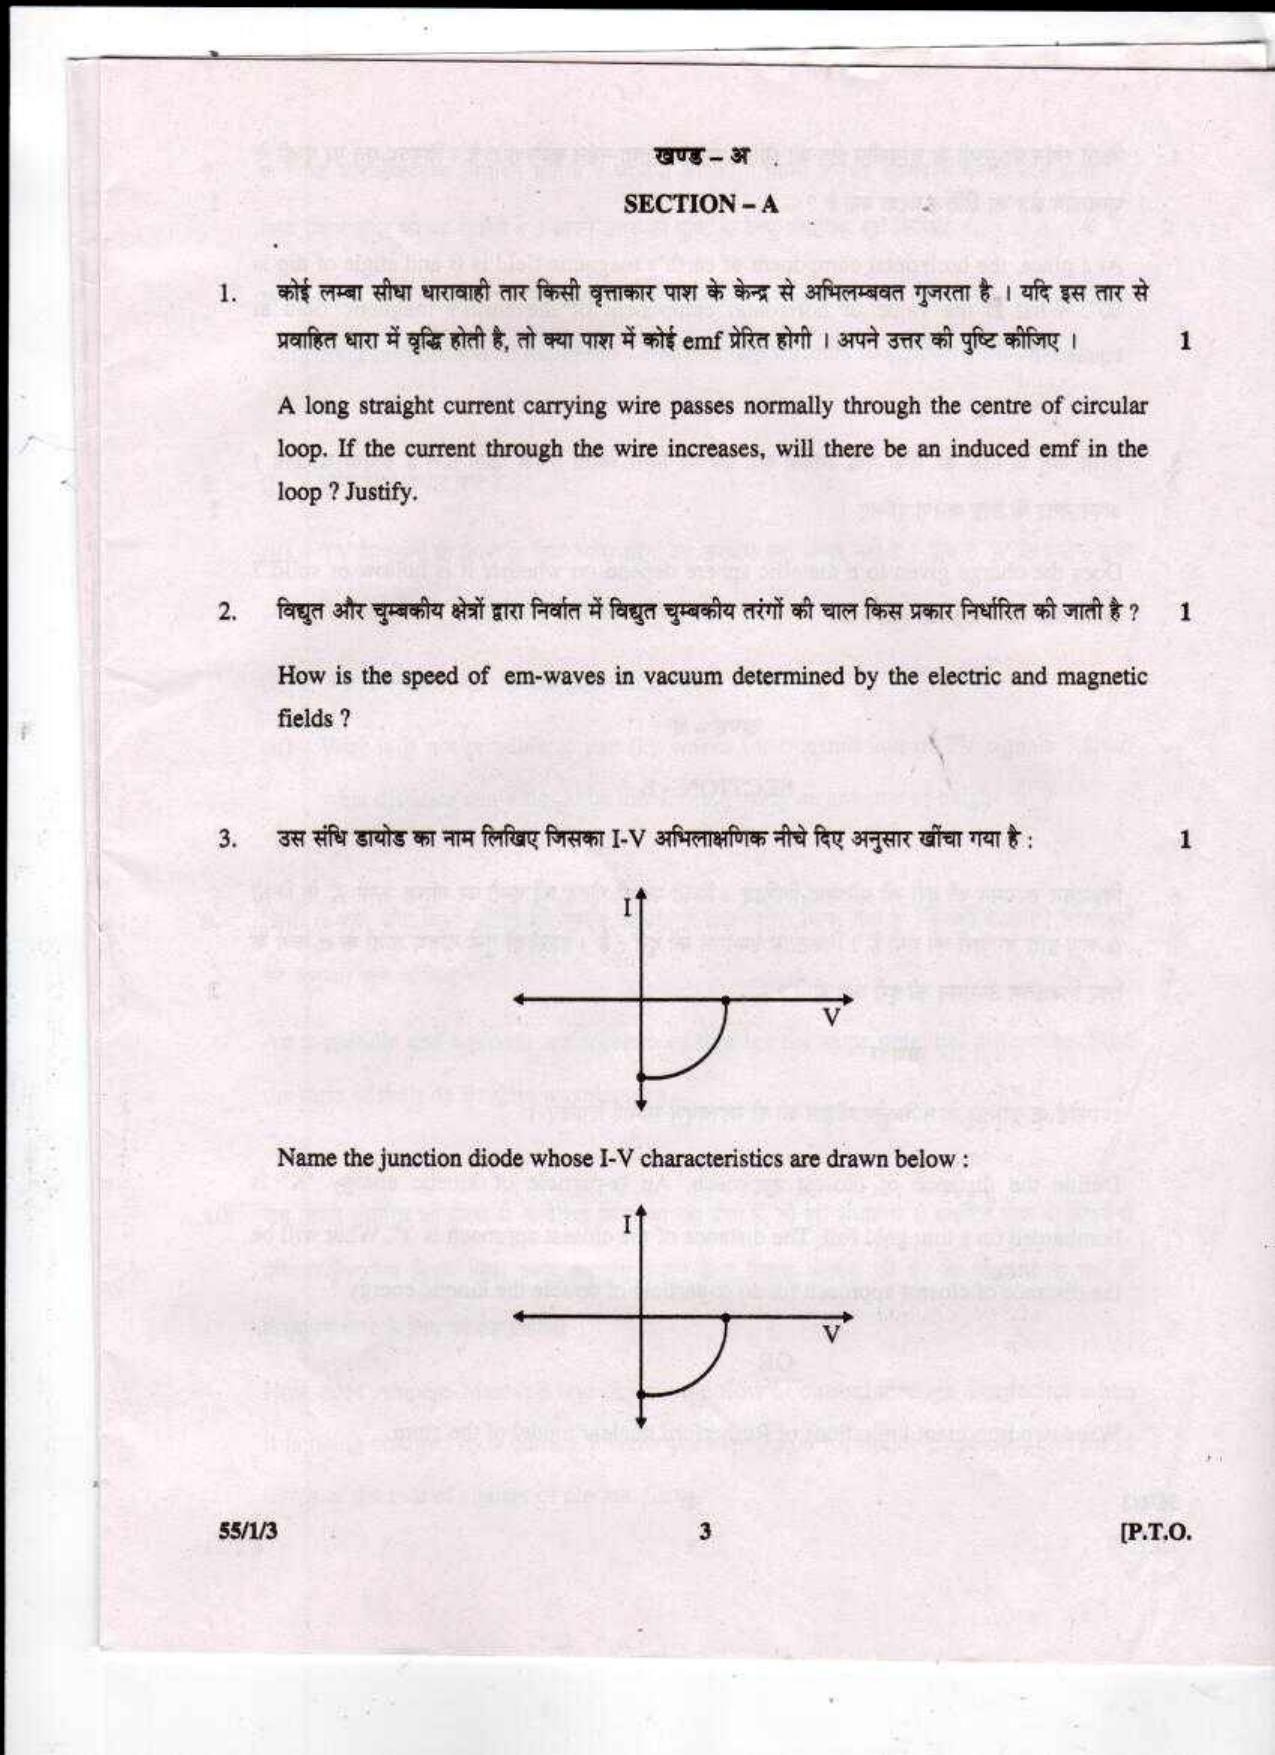 CBSE Class 12 Physics (Theory) SET 3-Delhi-12 2017 Question Paper - Page 3